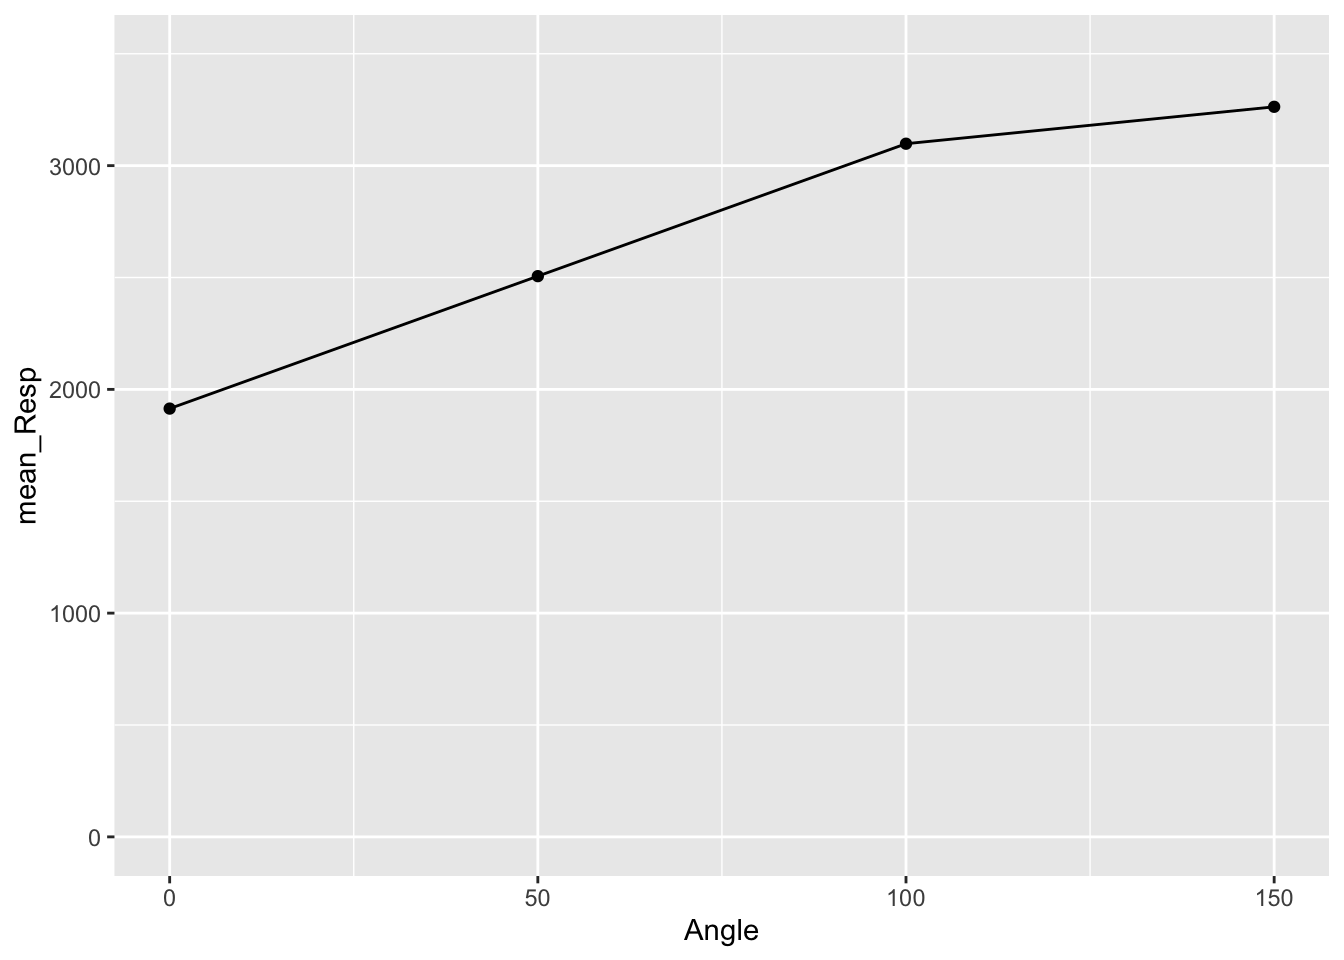 Basic Scatterplot of Response Time by Angle of Rotation